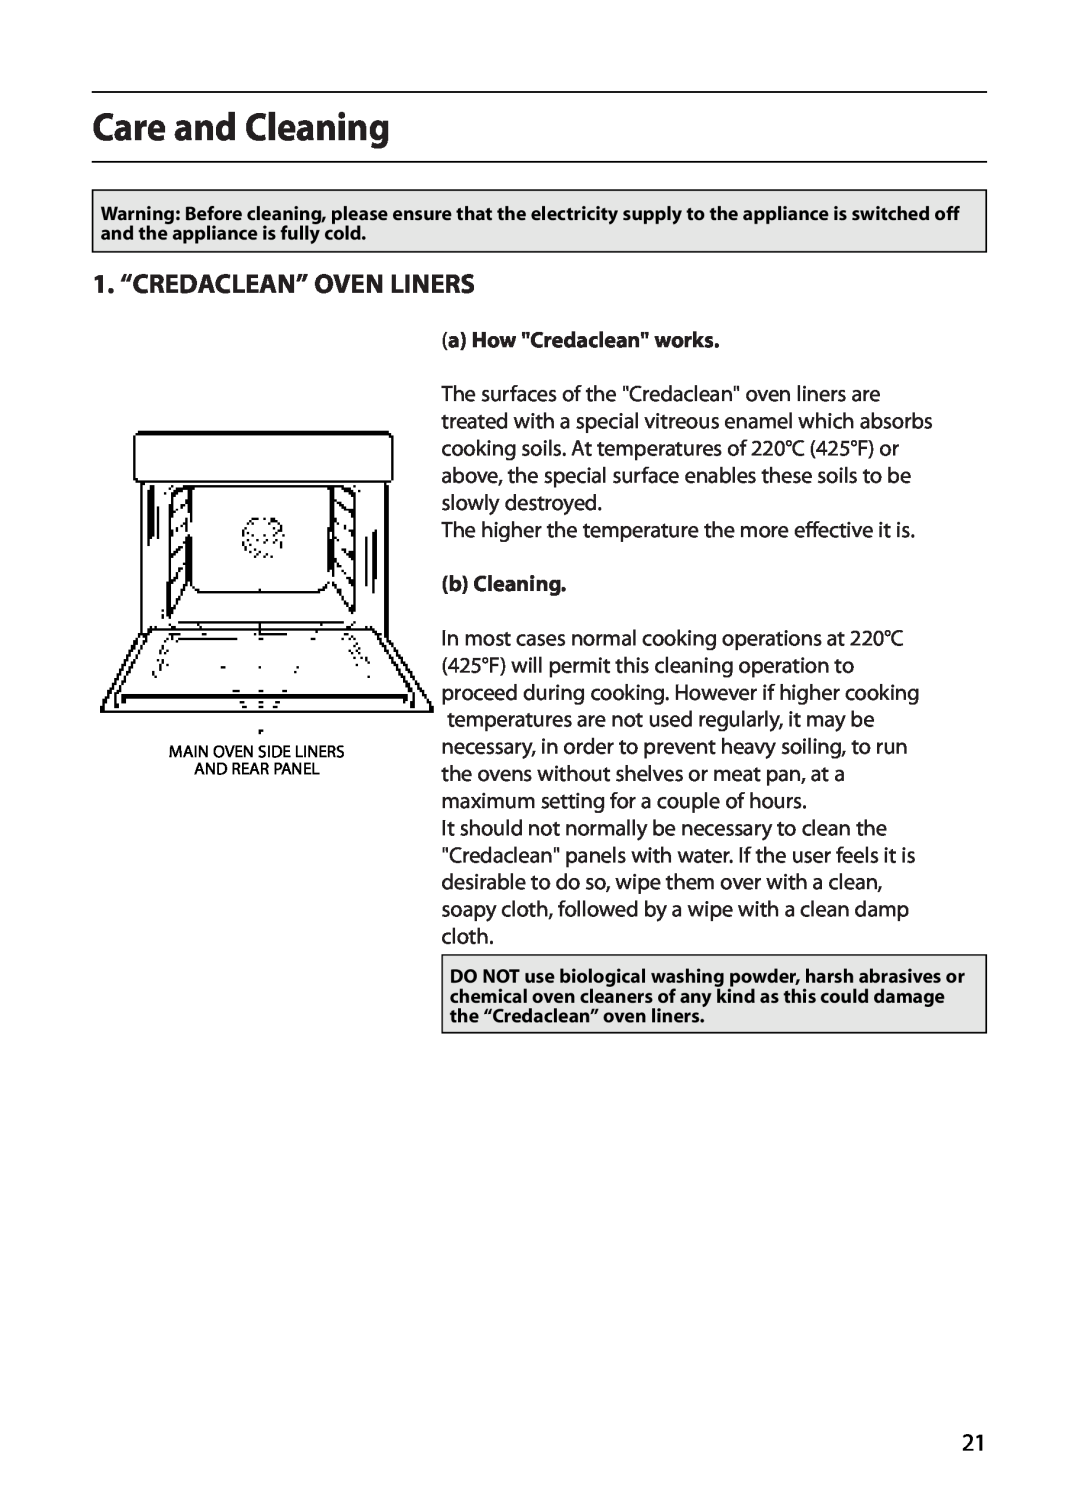 Creda D010E manual Care and Cleaning, 1. “CREDACLEAN” OVEN LINERS, a How Credaclean works, b Cleaning 